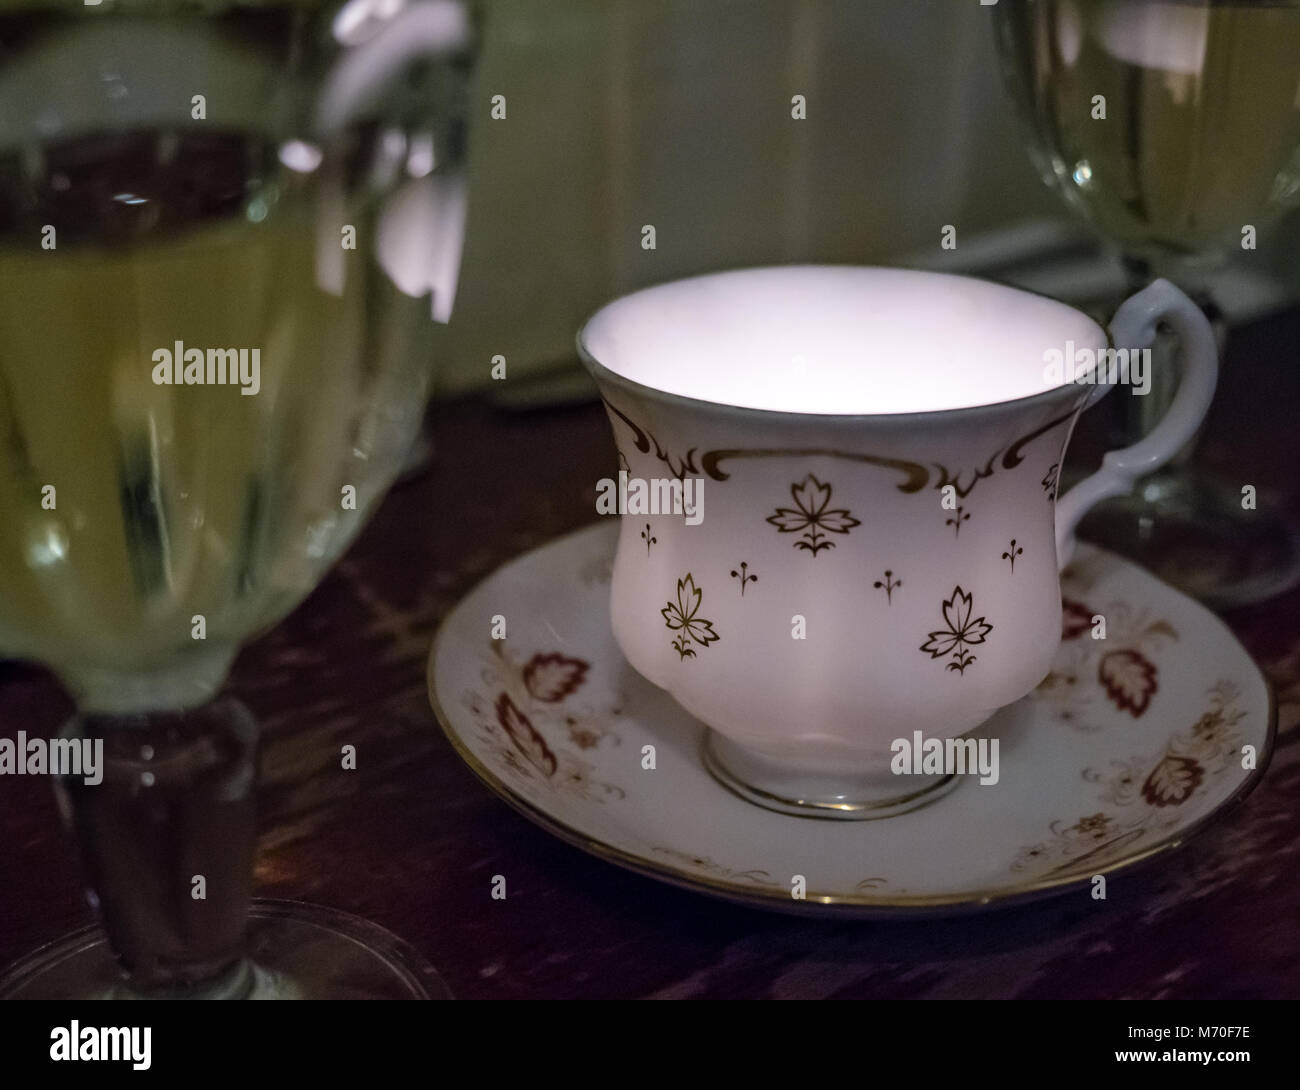 Close up of old fashioned tea cup and saucer with candle light, white wine in glasses, restaurant table, Leith, Edinburgh, Scotland, UK Stock Photo